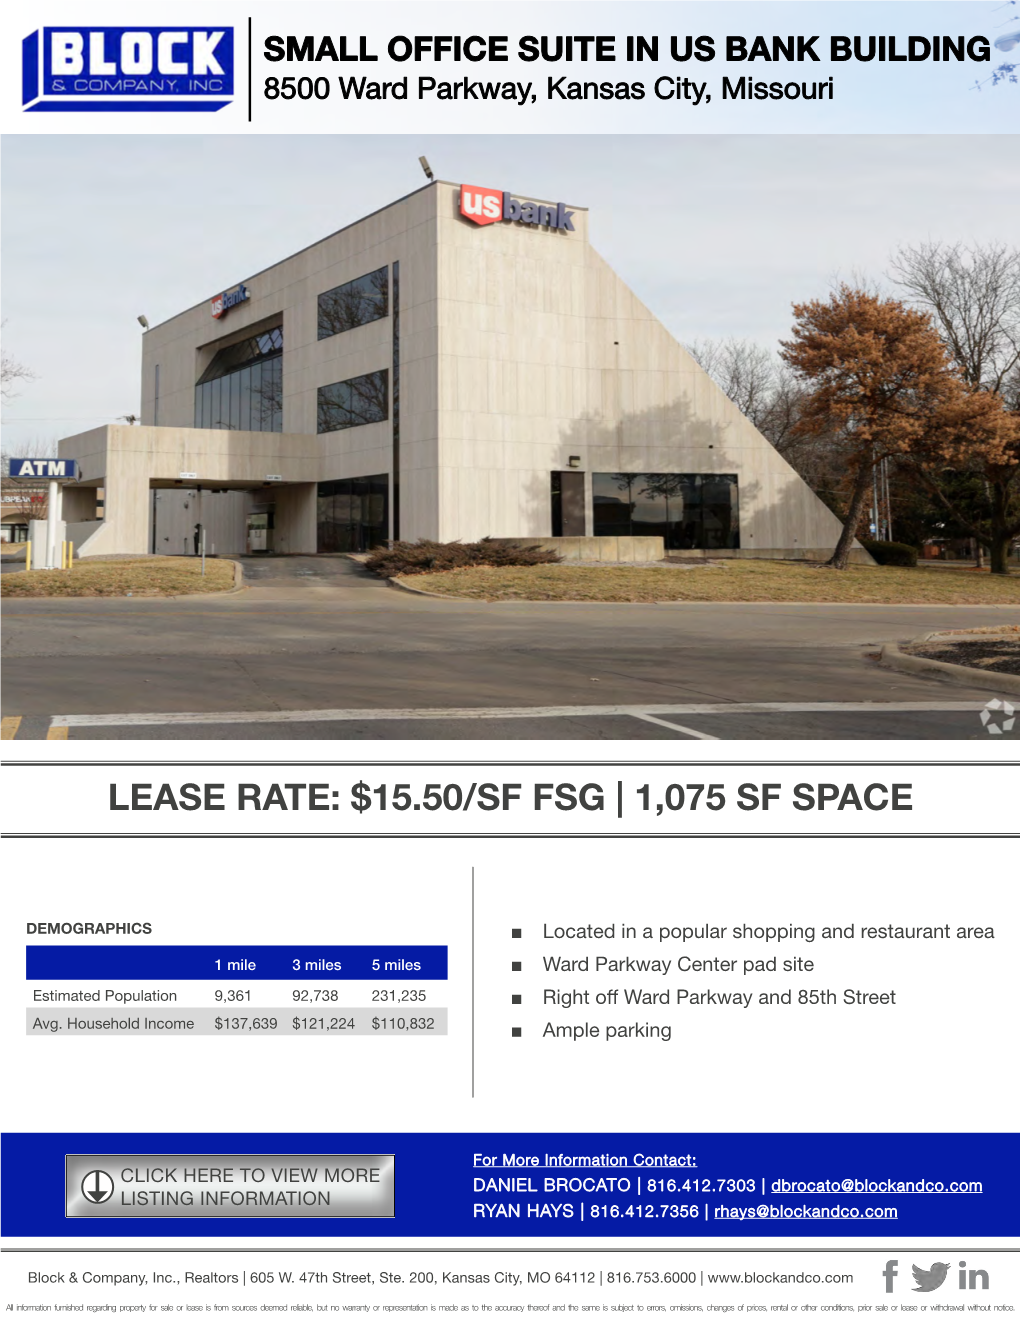 SMALL OFFICE SUITE in US BANK BUILDING 8500 Ward Parkway, Kansas City, Missouri